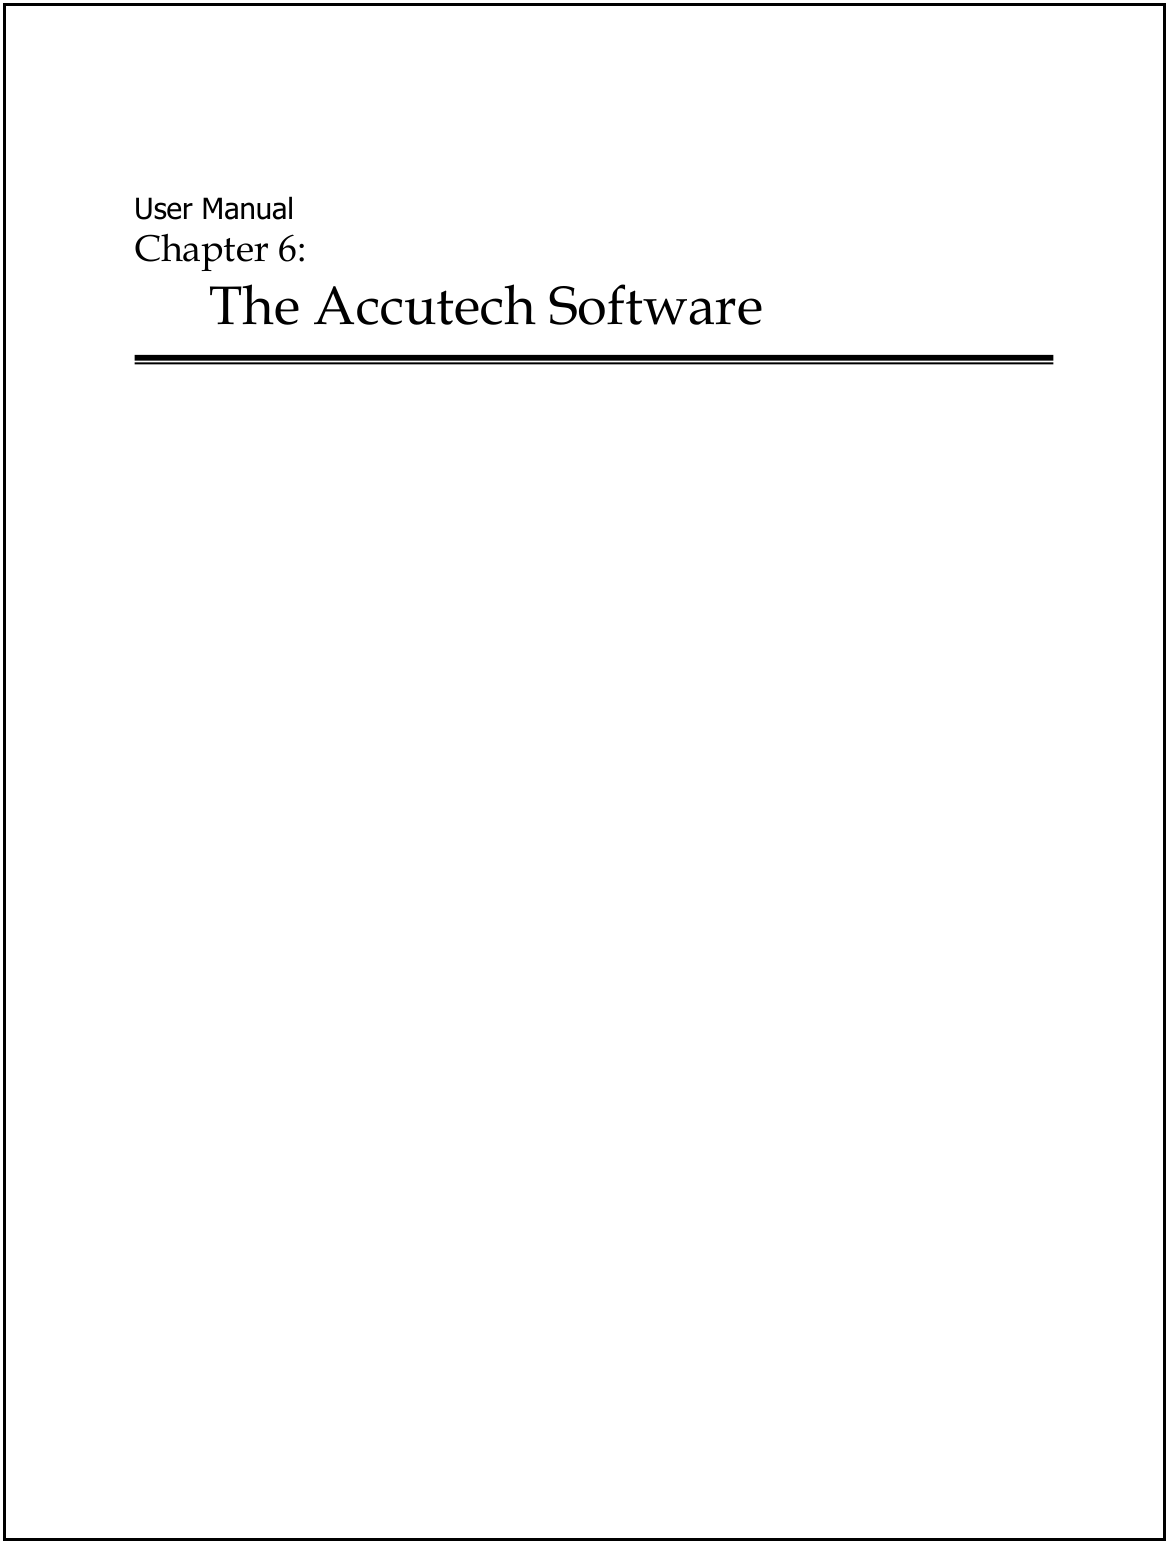  User Manual Chapter 6:  The Accutech Software      